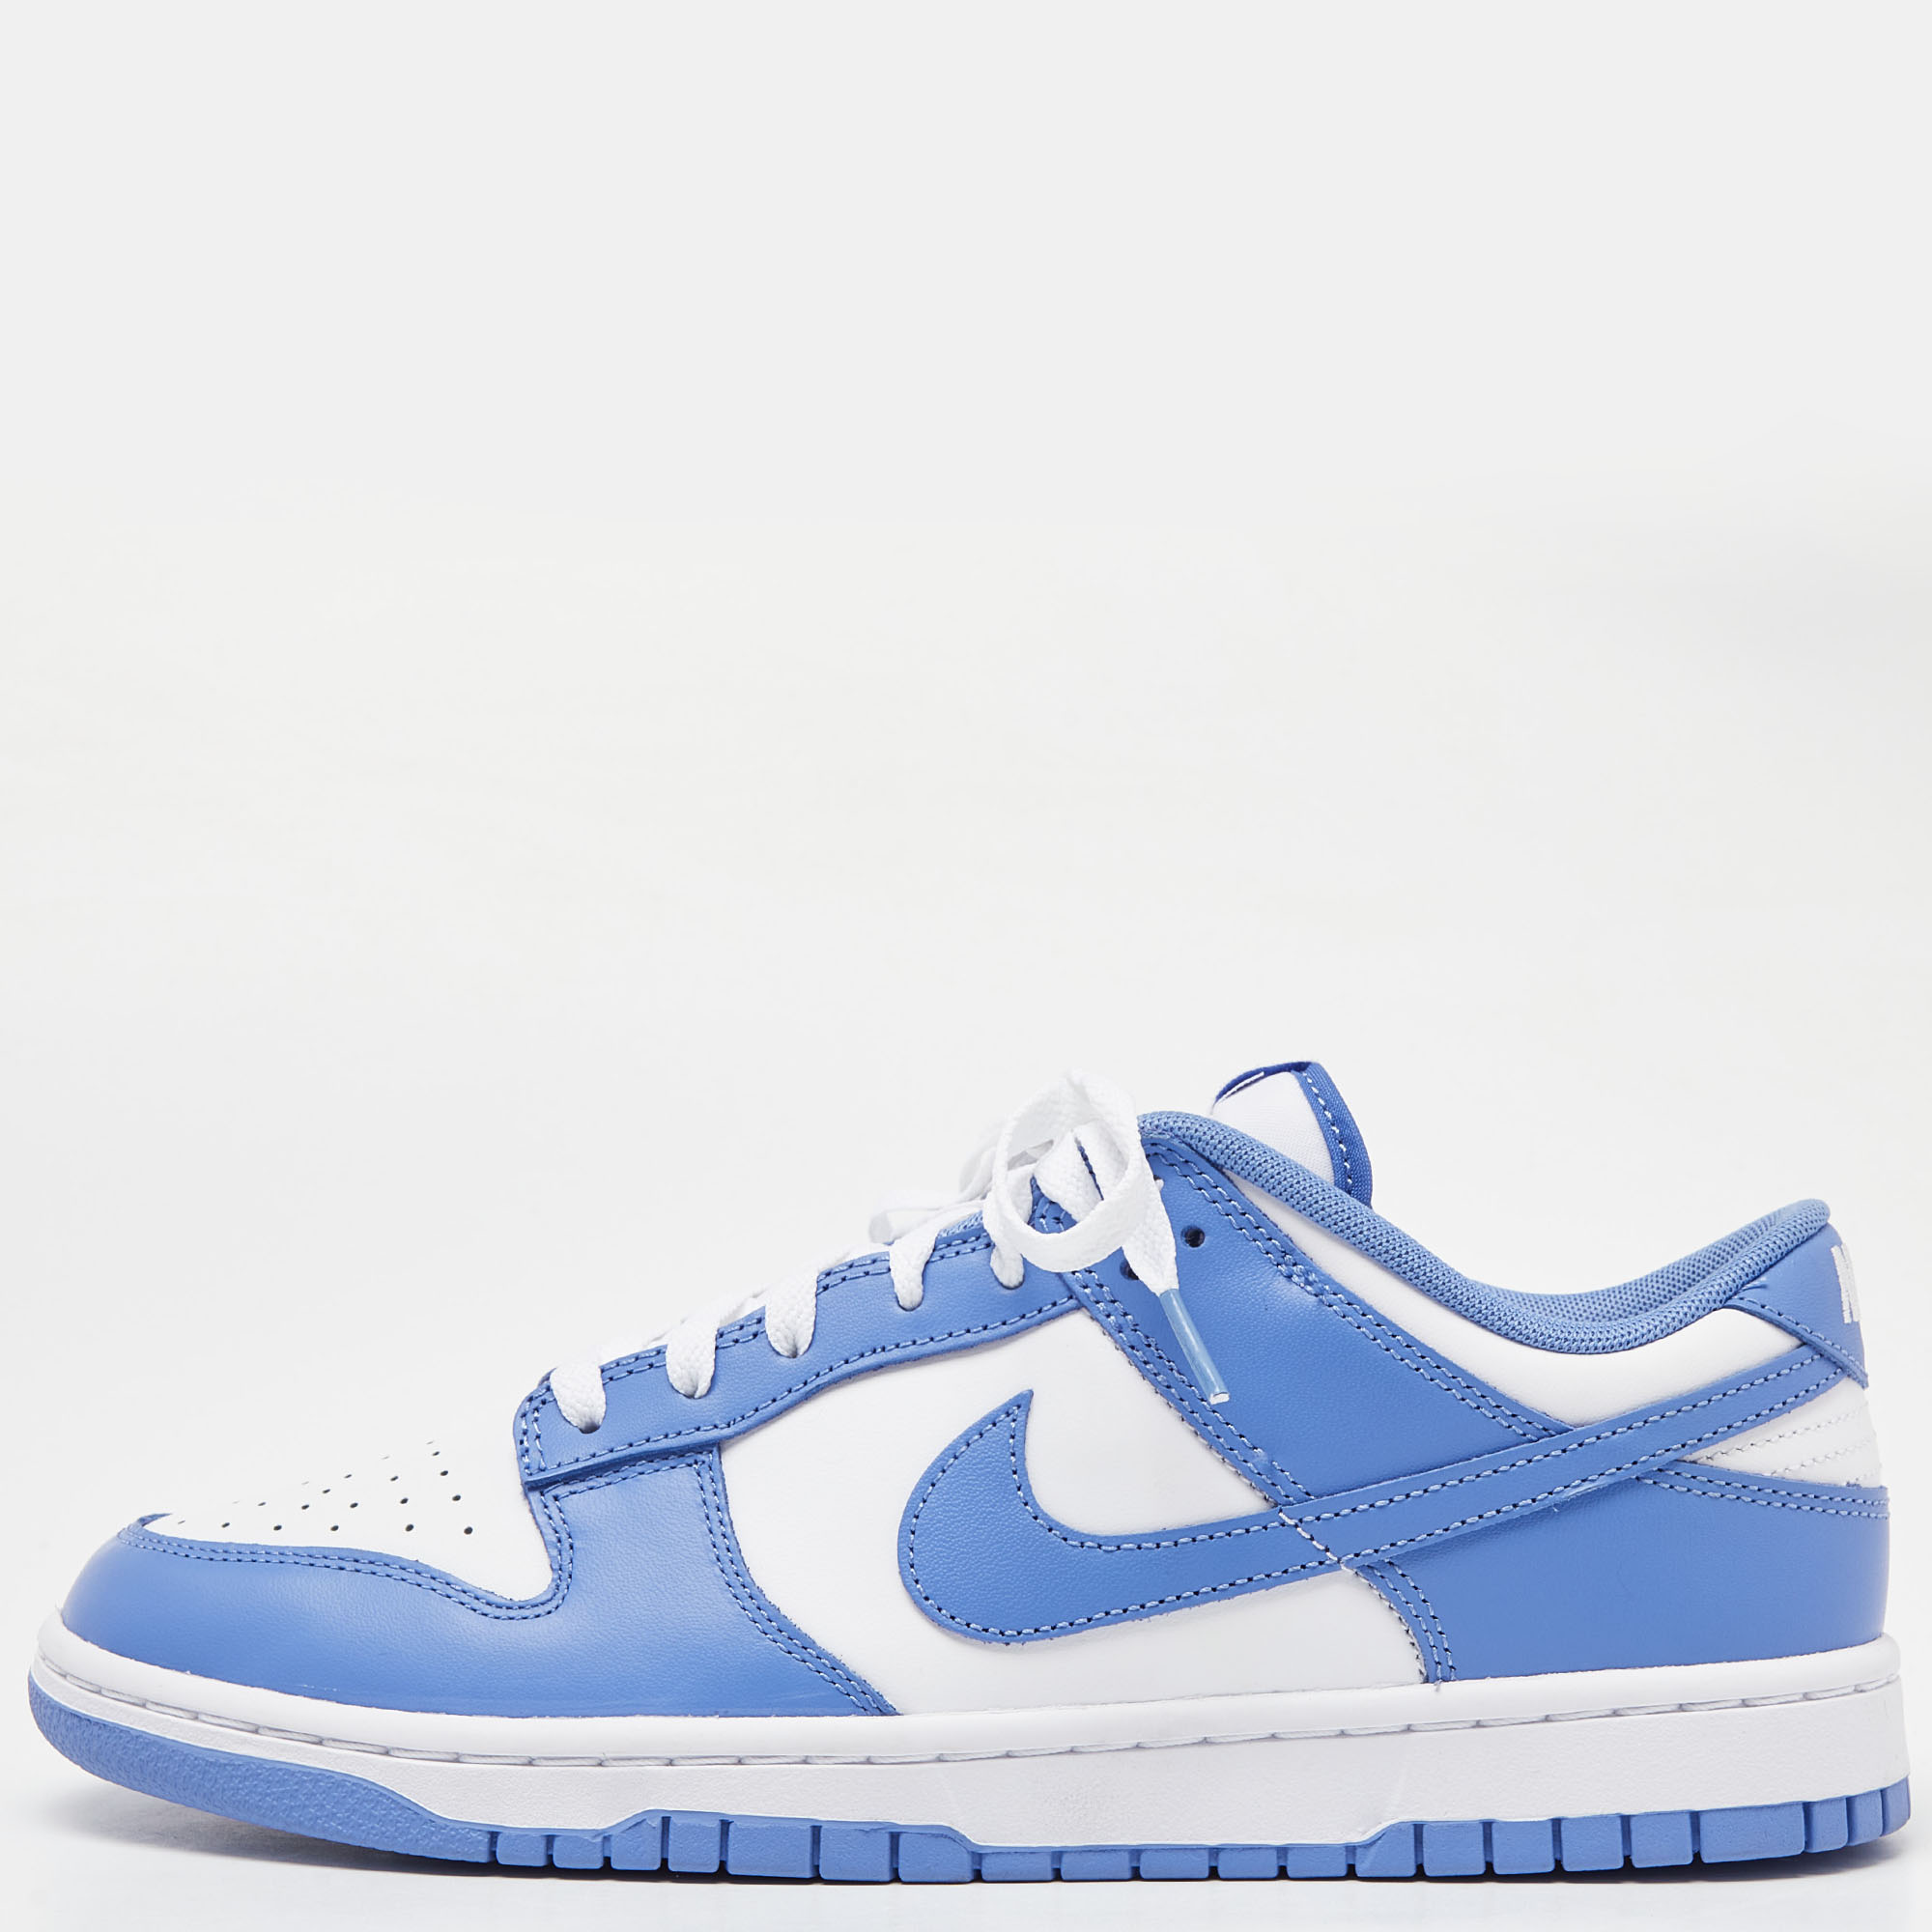 

Nike Blue/White Leather Dunk Low Cools Down “Polar Blue” Sneakers Size